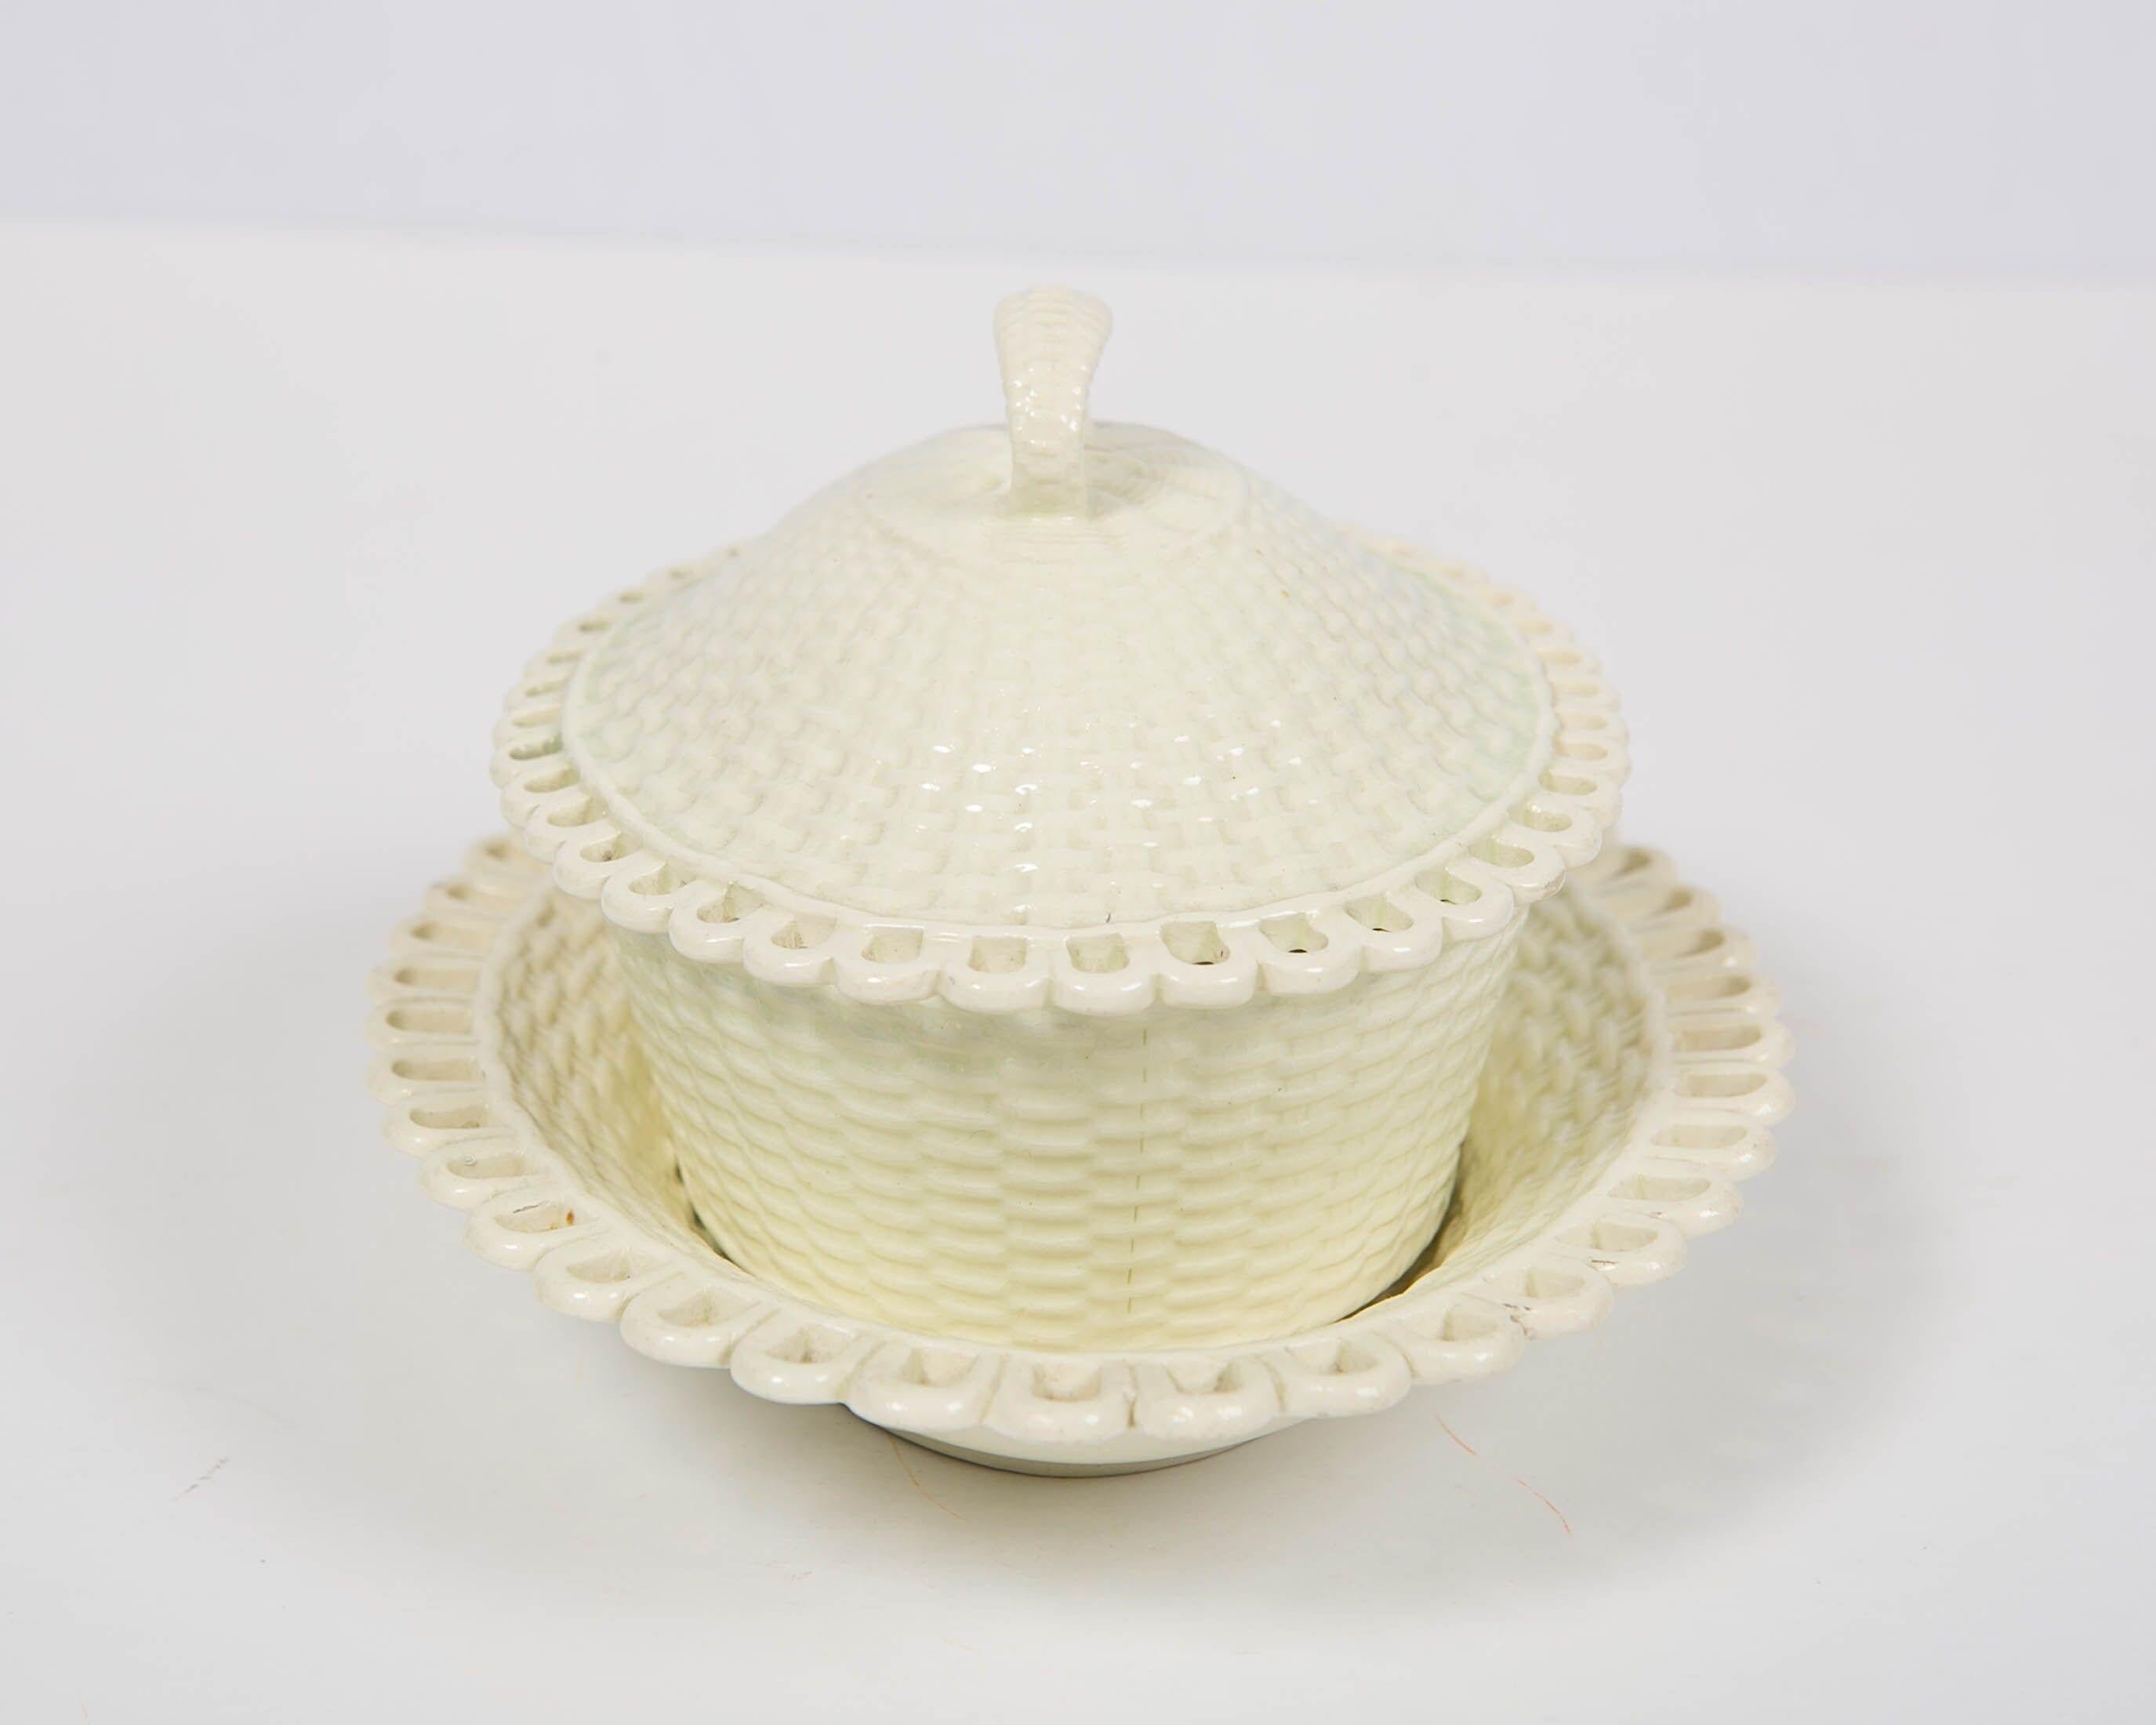 English 18th Century Creamware Sauce Tureen and Stand Made in England, circa 1790